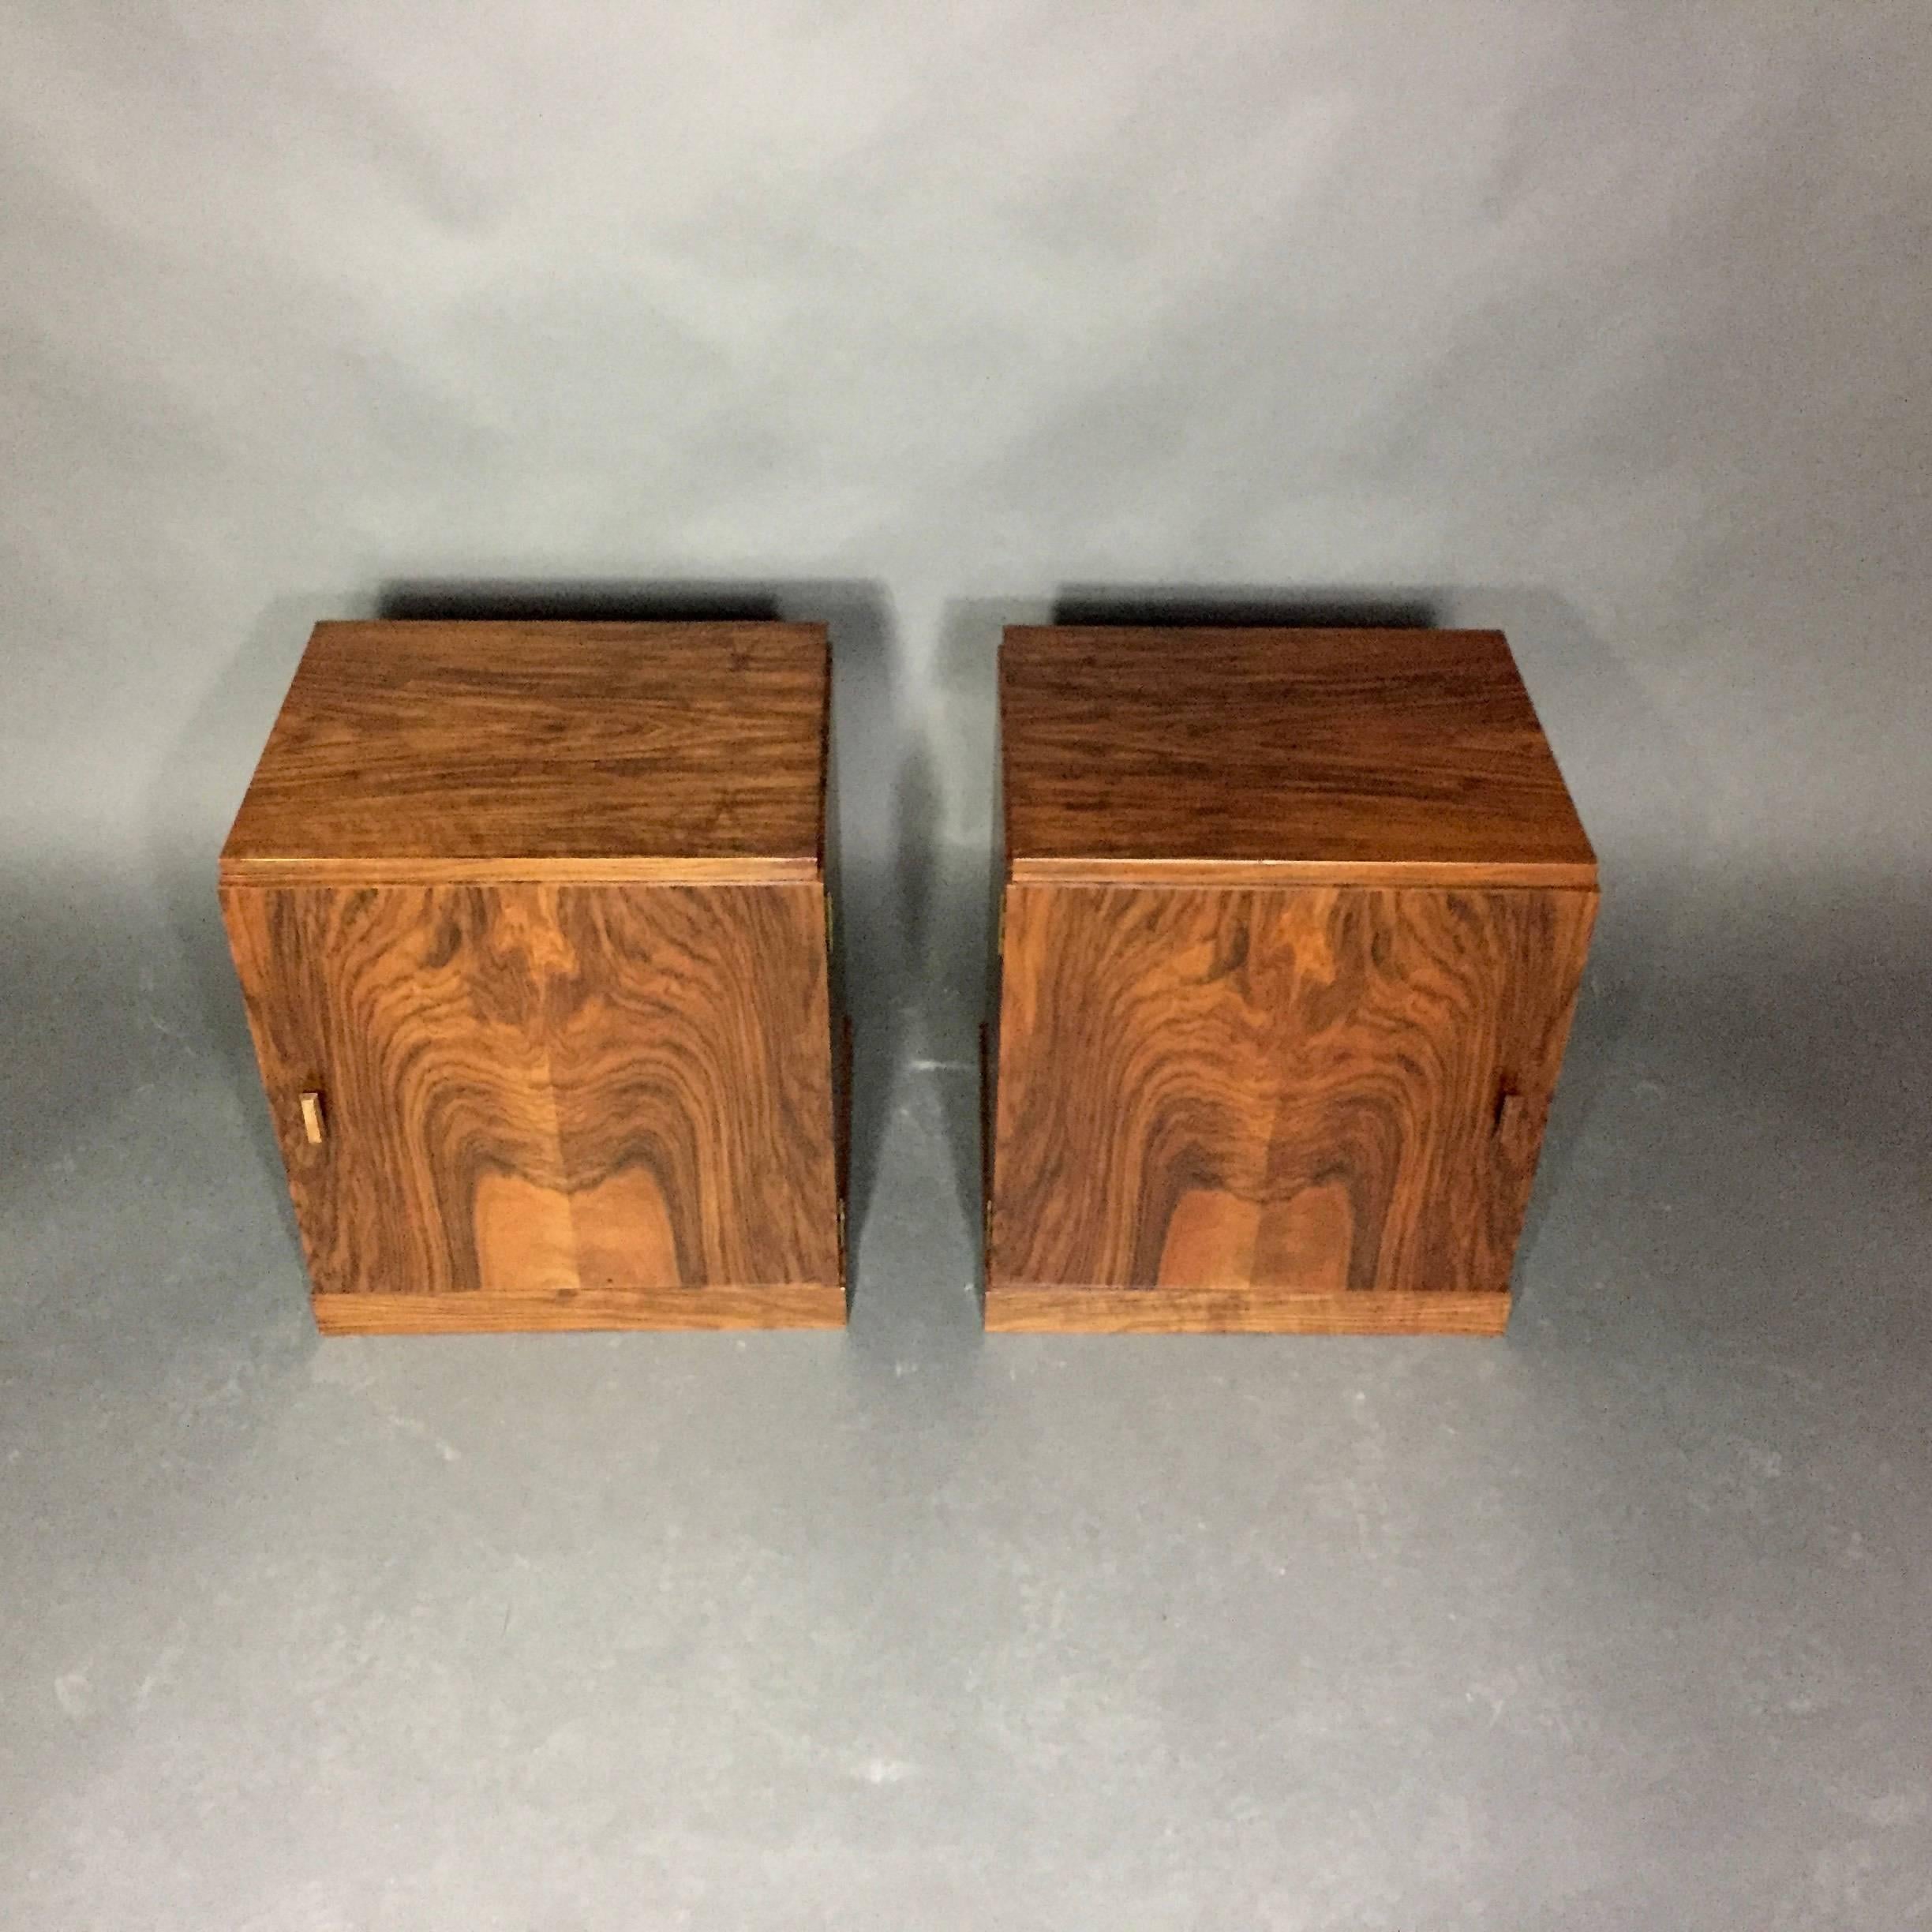 Beautifully grained walnut veneer pair of square bedside tables or nightstands, purchased in Sweden though could be of Continental production, likely 1940s - with bakelite handles. Refinished condition.